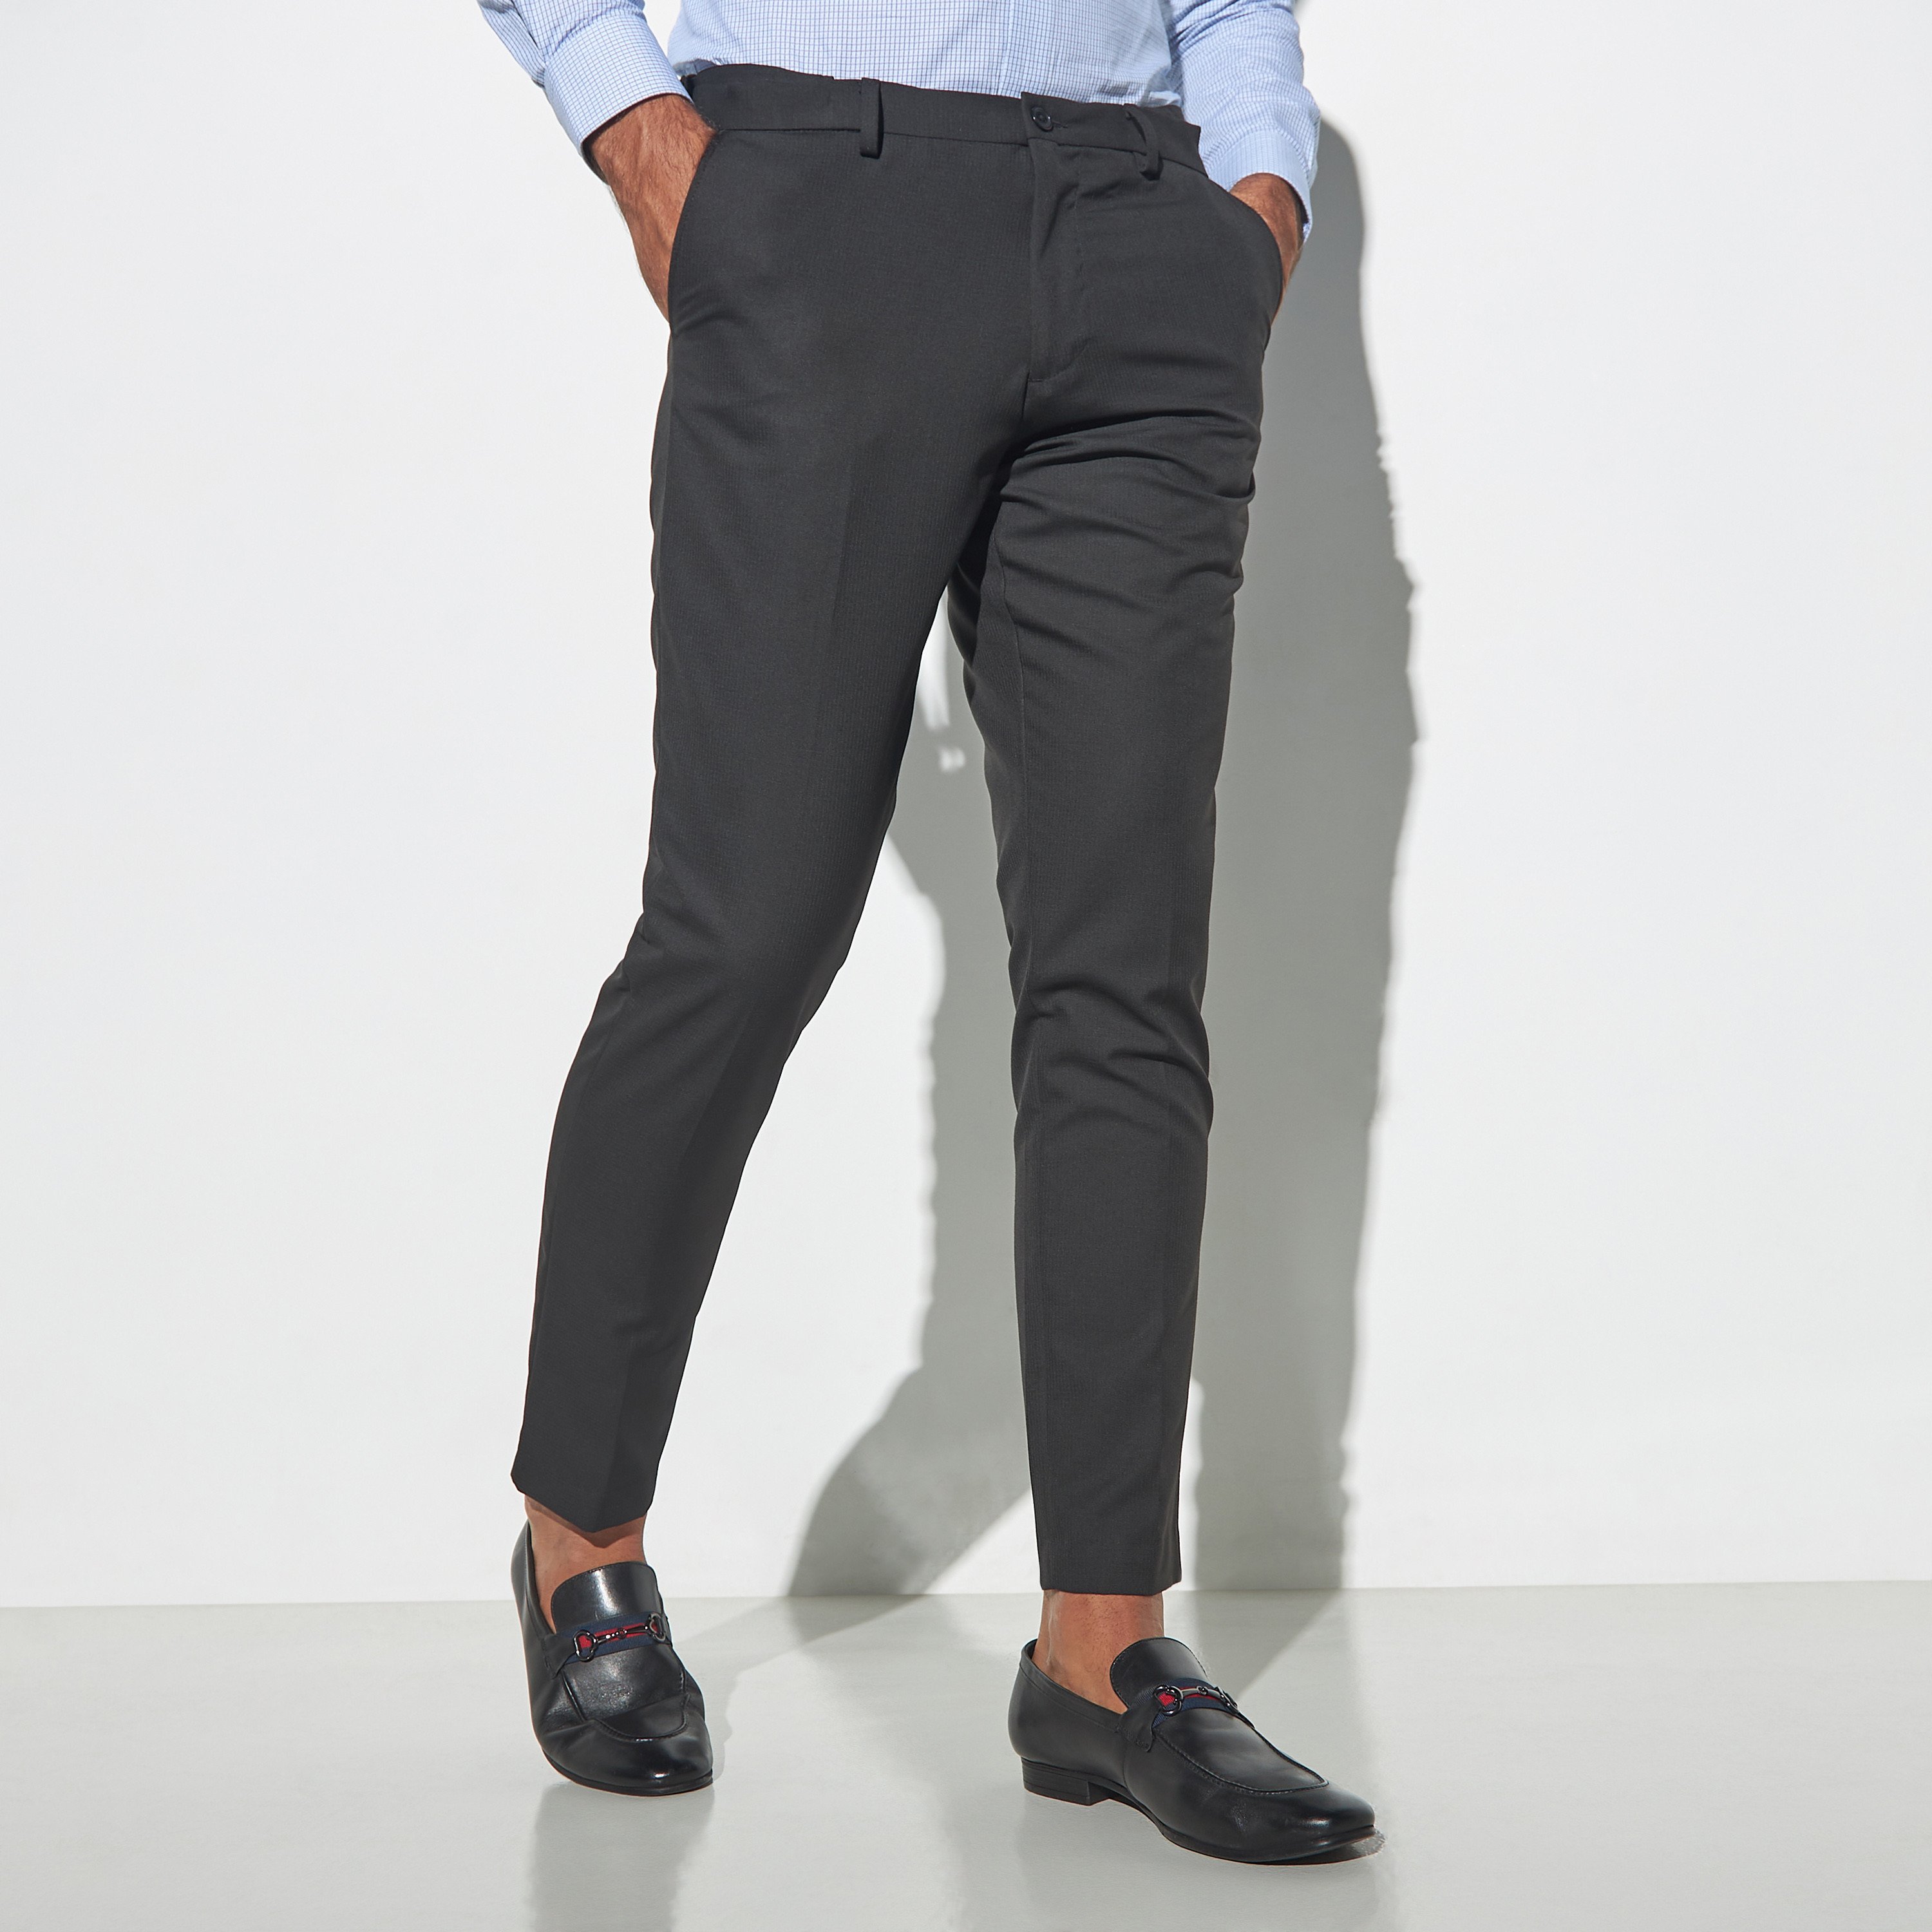 What are the best brands for men's dress pants? - Quora